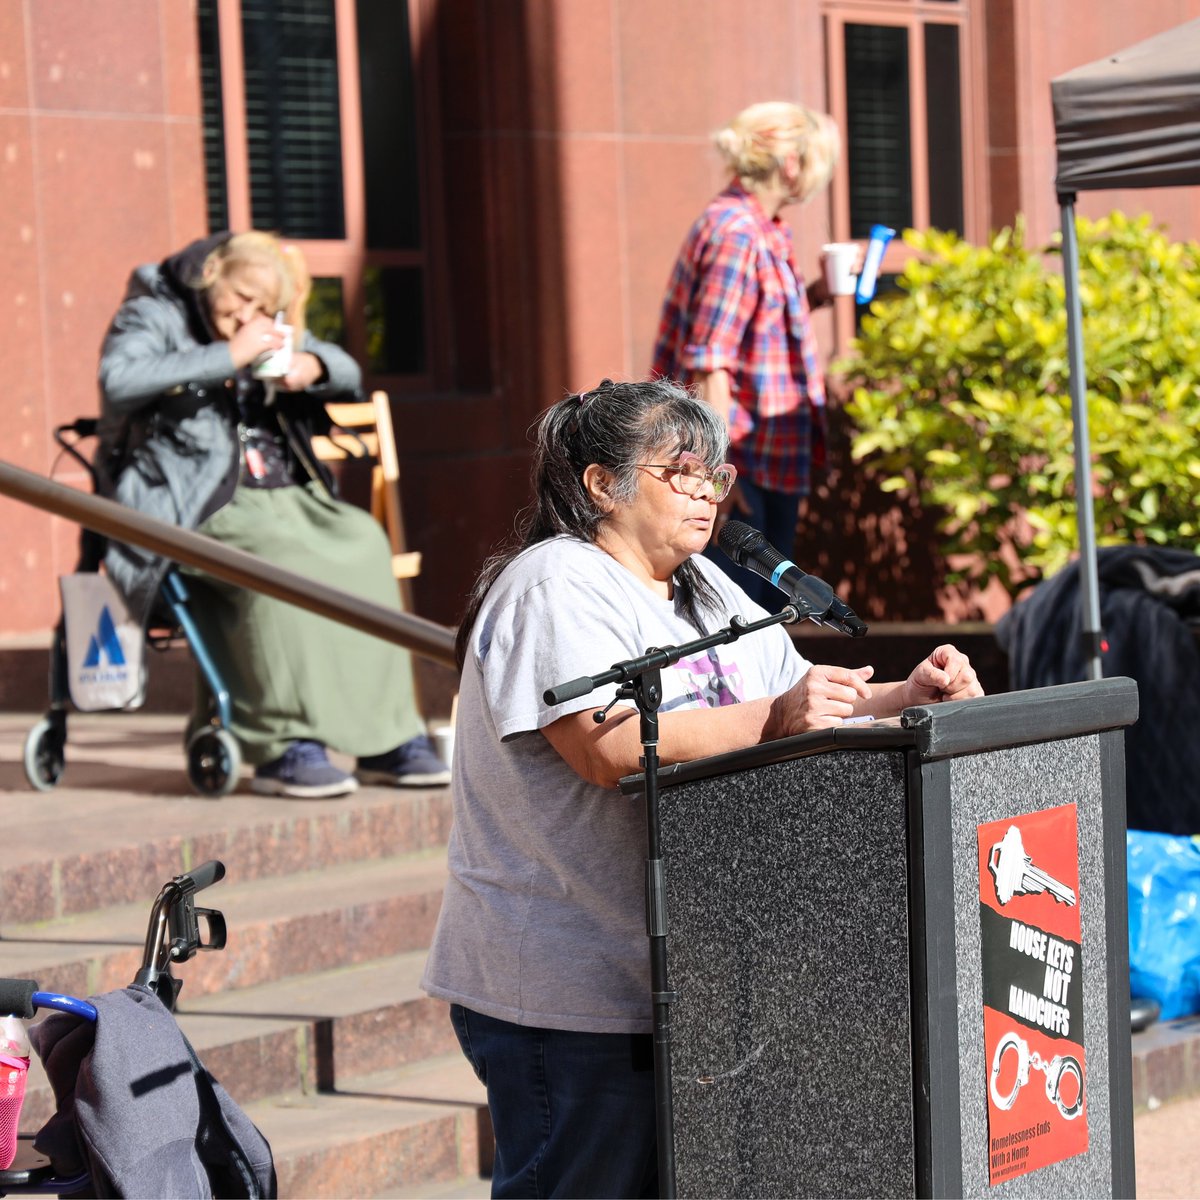 Thank you to everyone who came out to the #housingnothandcuffs rally on Monday! ❤️ We heard from so many wonderful voices about the need to decriminalize poverty and homelessness; provide adequate housing and shelter for all; and continue to SHOW UP in Seattle.